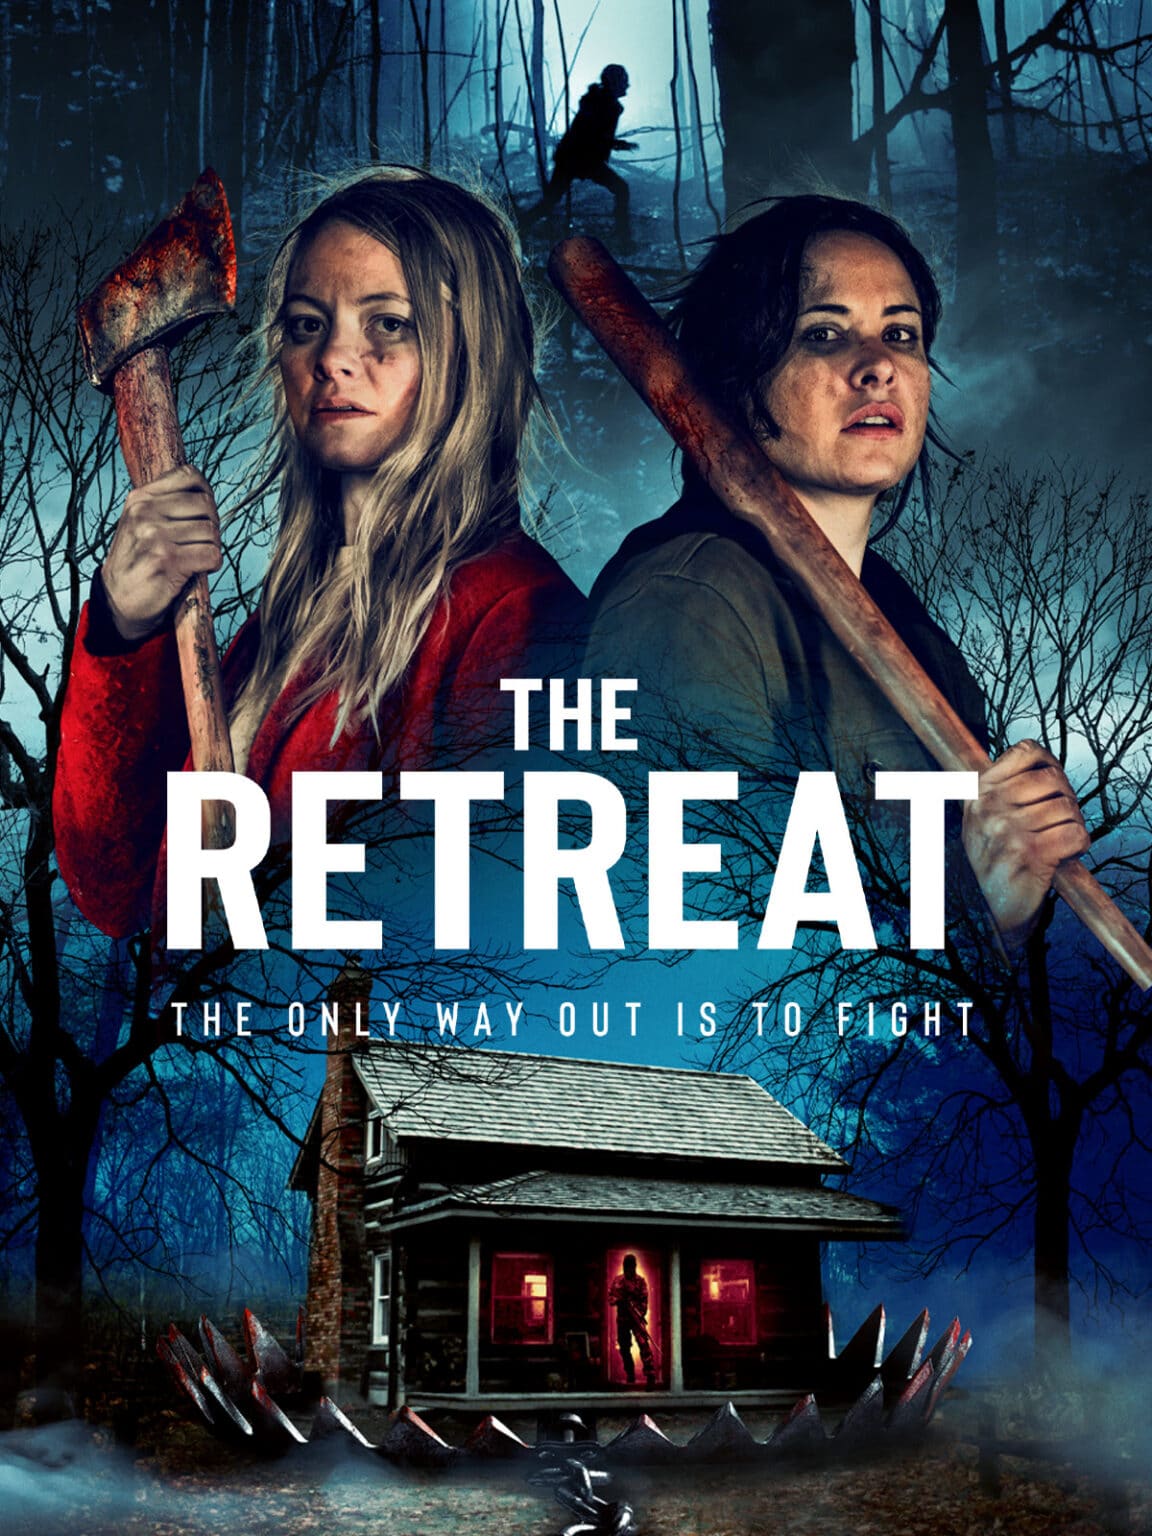 The Retreat - Teaser Poster